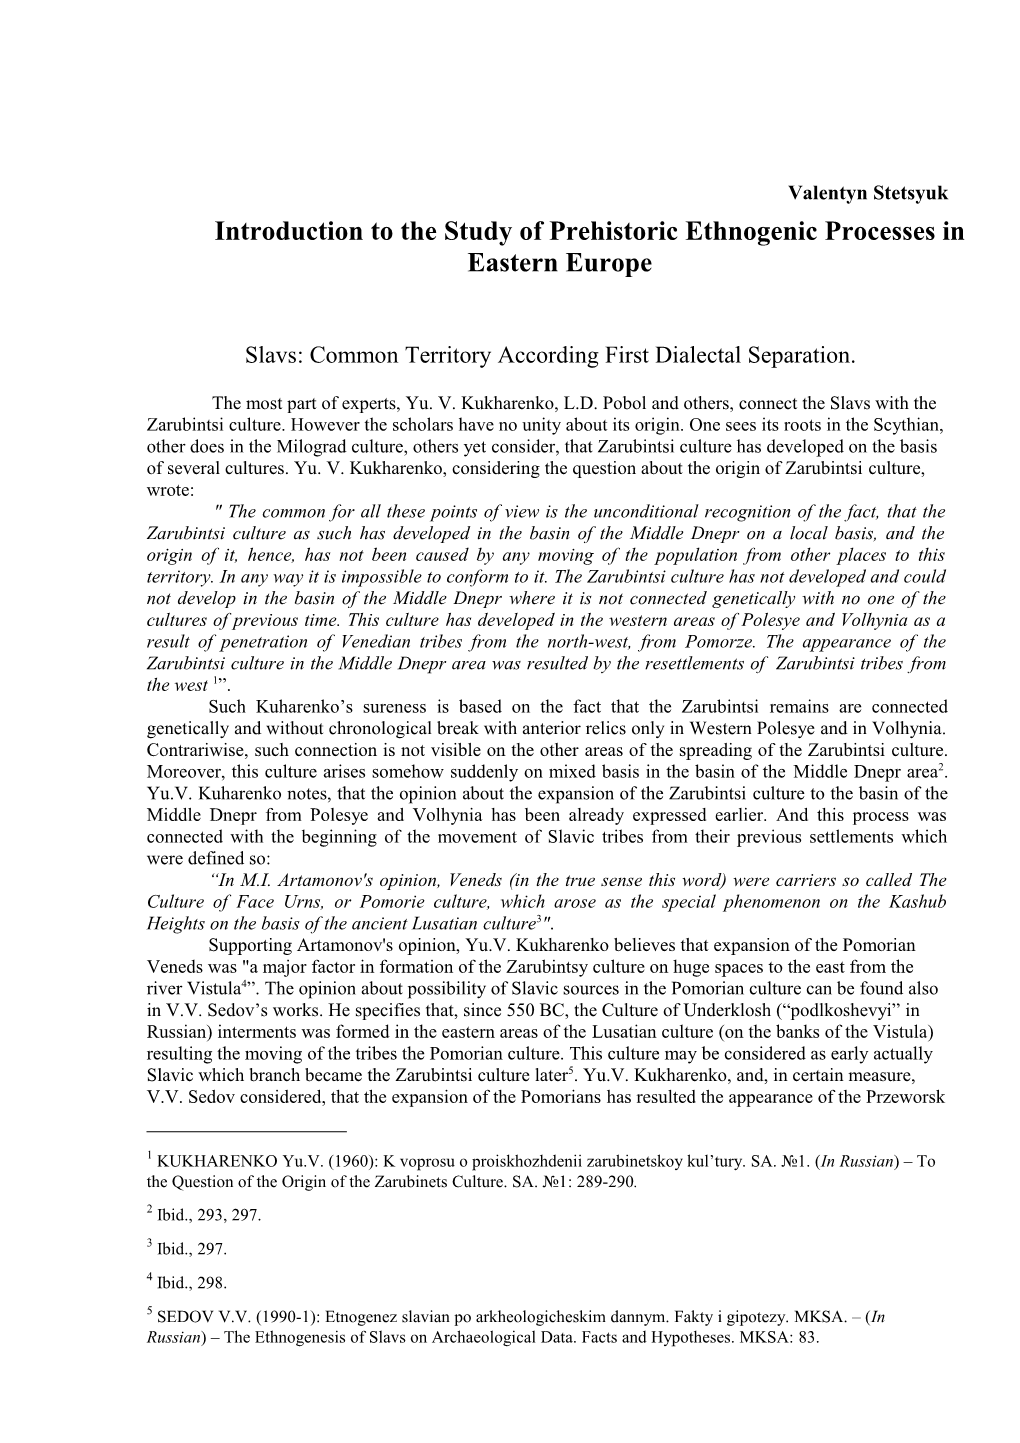 Introduction to the Study of Prehistoric Ethnogenic Processes in Eastern Europe